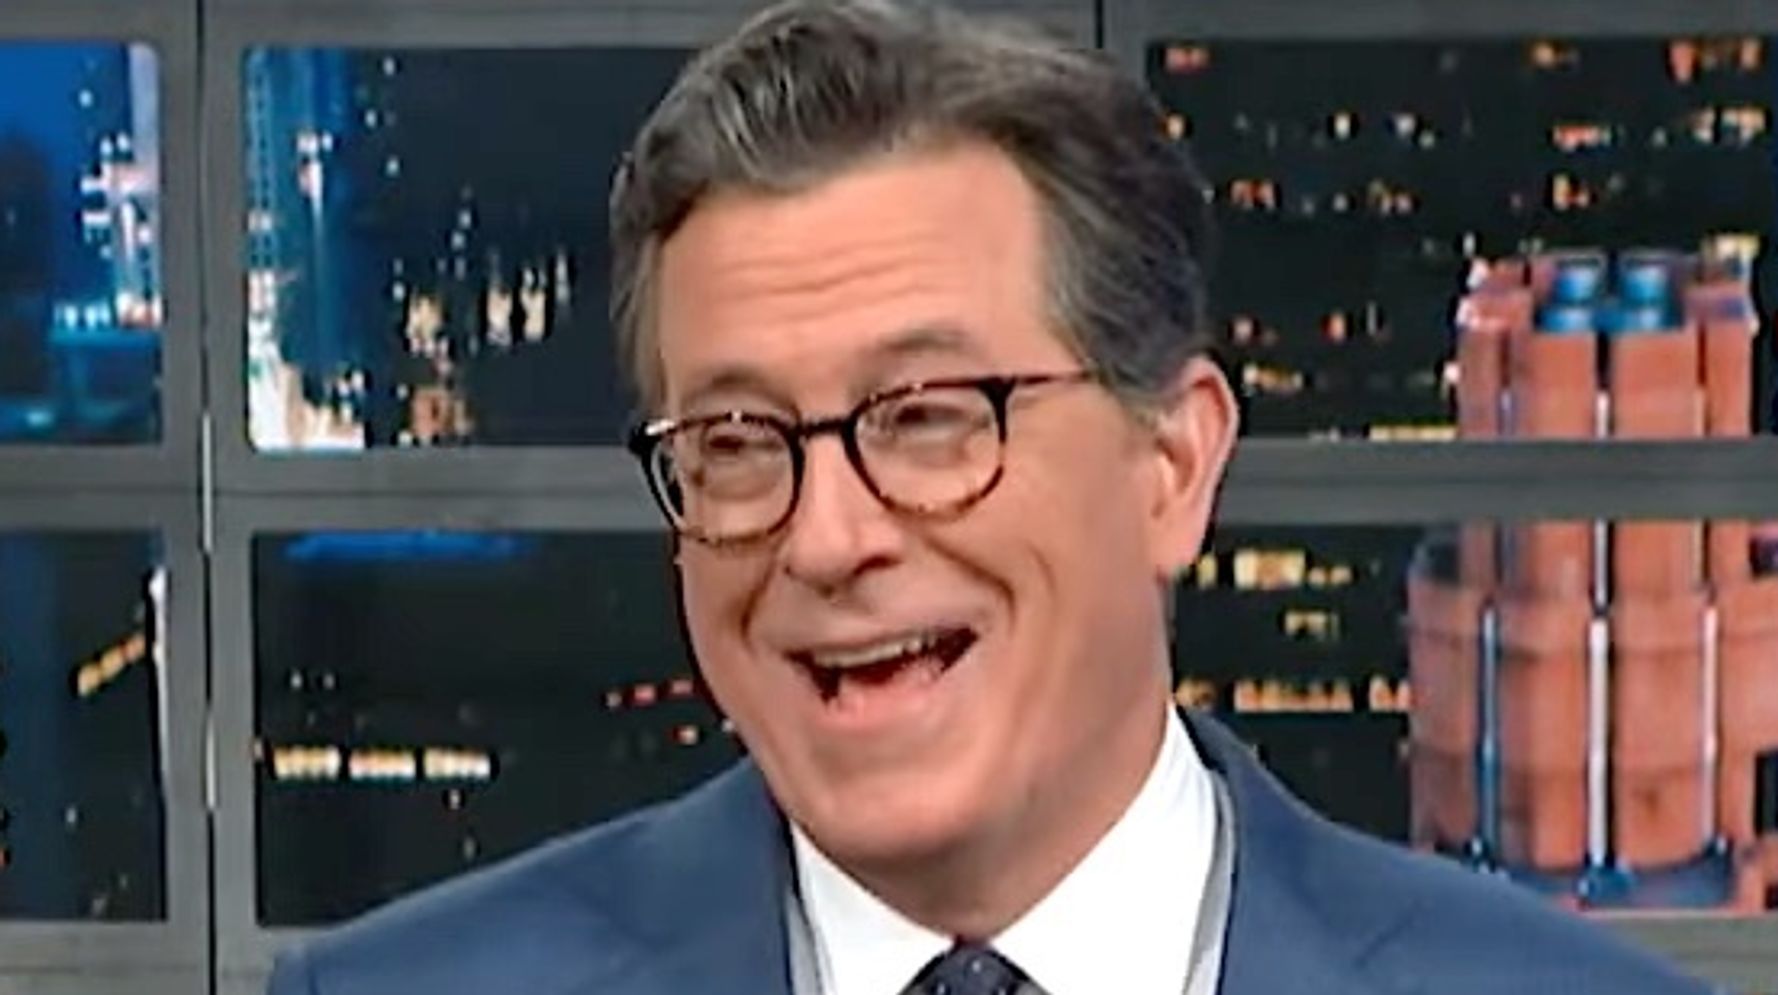 Stephen Colbert Spots One Of The Most Awkward Fox News Moments Yet